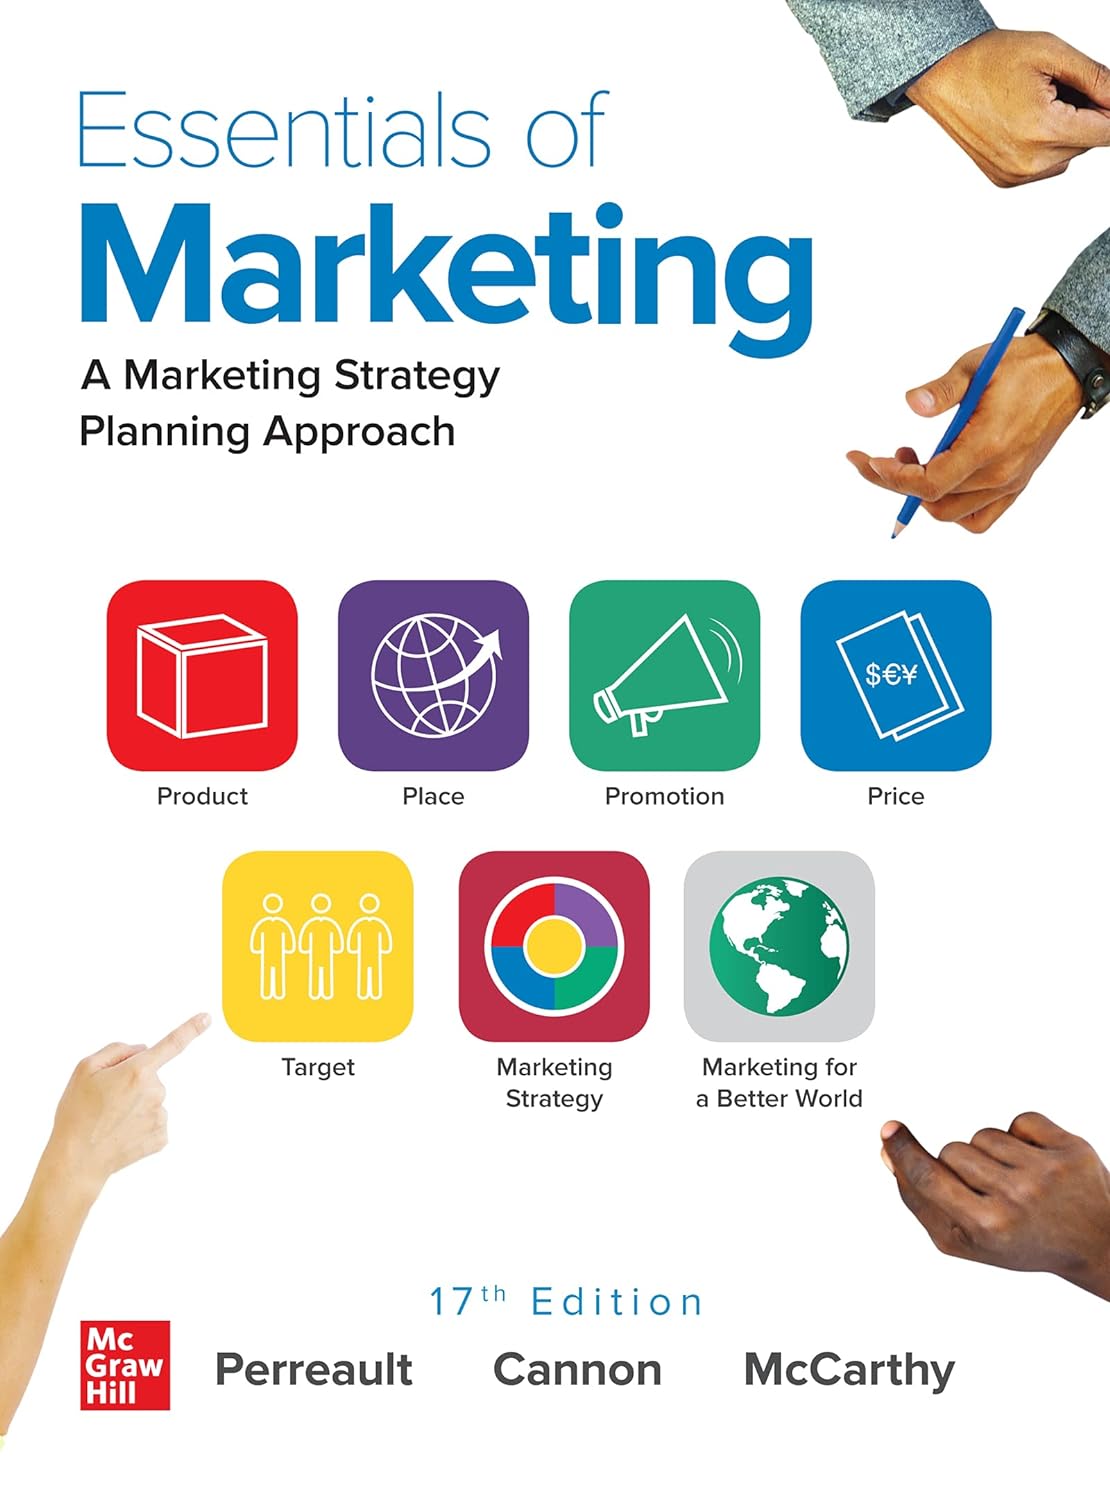 Test Bank for Essentials of Marketing 17th Edition by William Perreault, Jr.